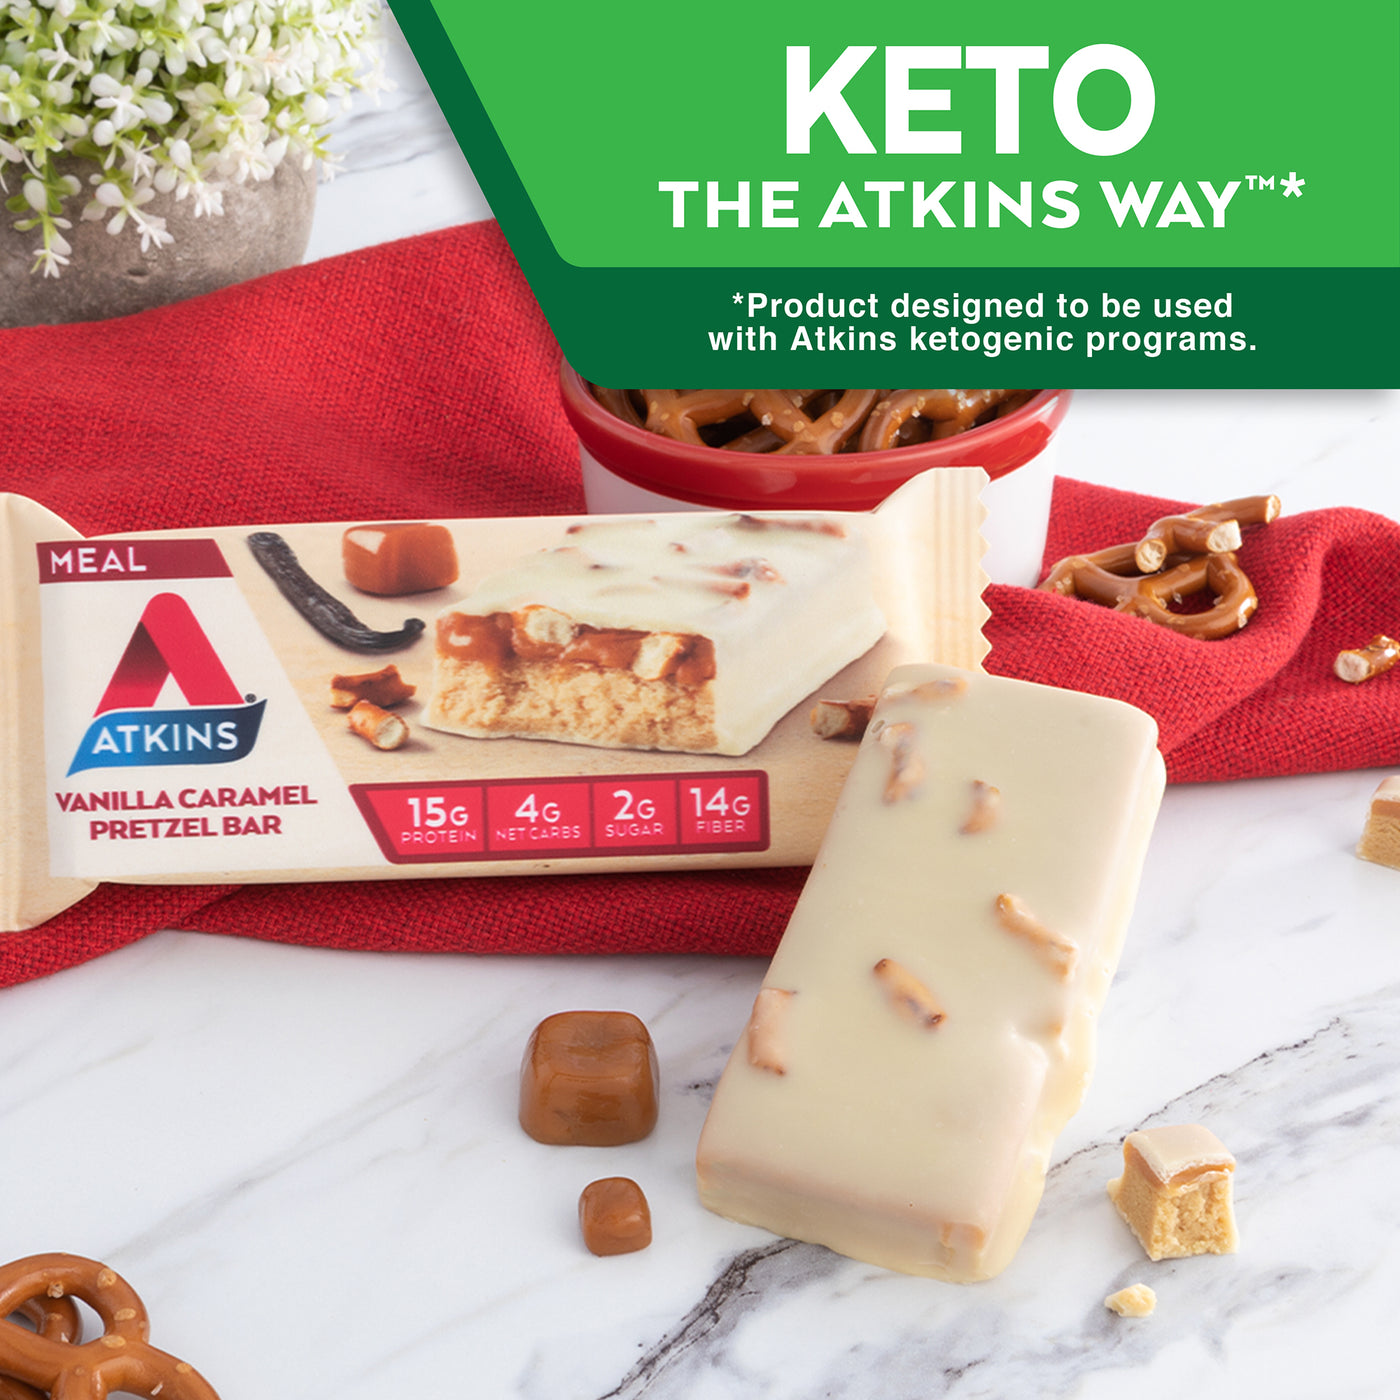 Vanilla Caramel Pretzel Bar with vanilla bean, caramel and red cloth on marble table; Keto The Atkins Way* *Product designed to be used with Atkins ketogenic programs.